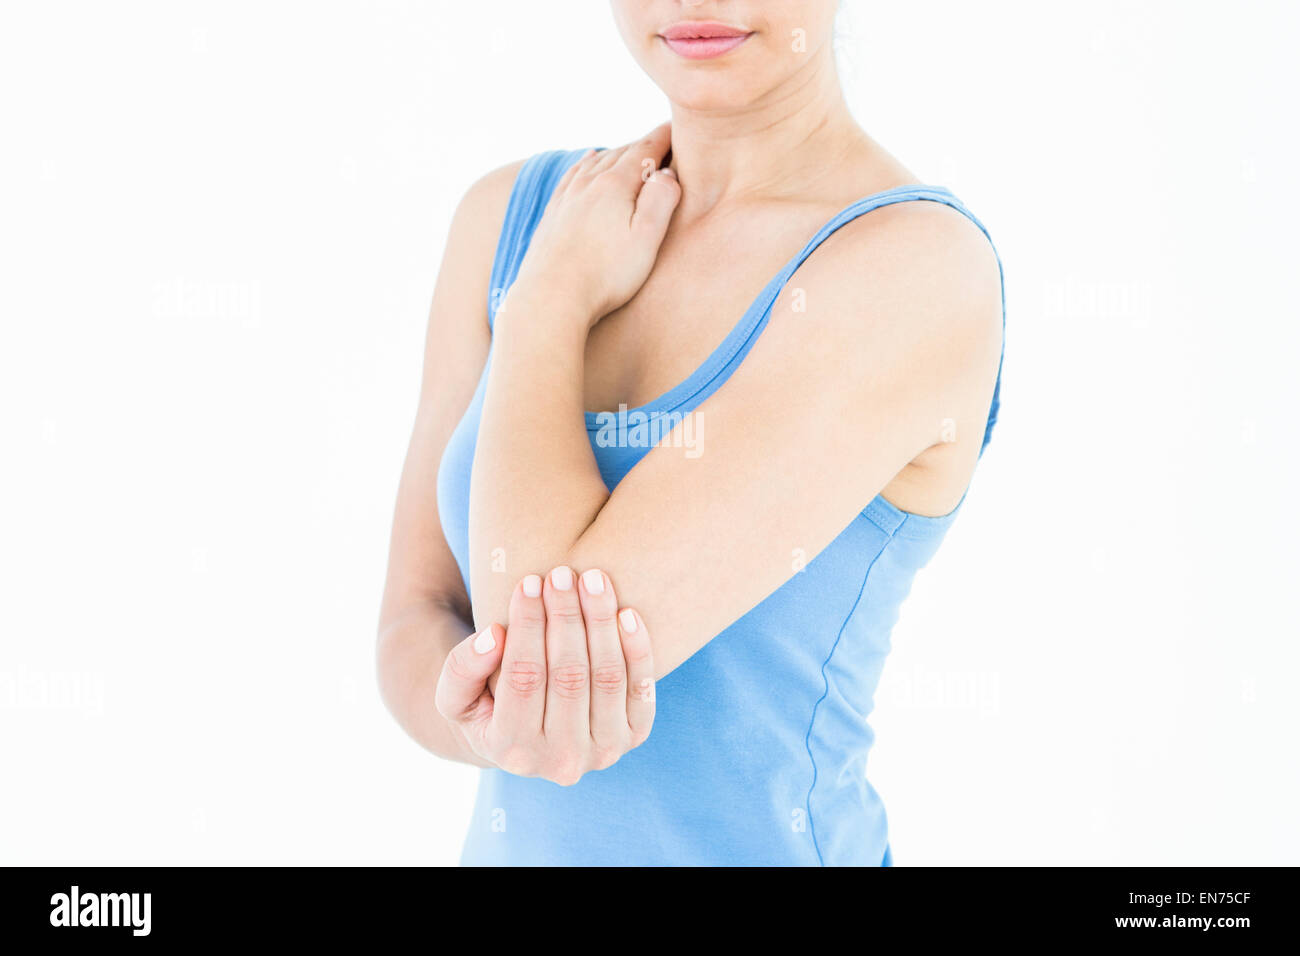 Woman touching her painful elbow Stock Photo